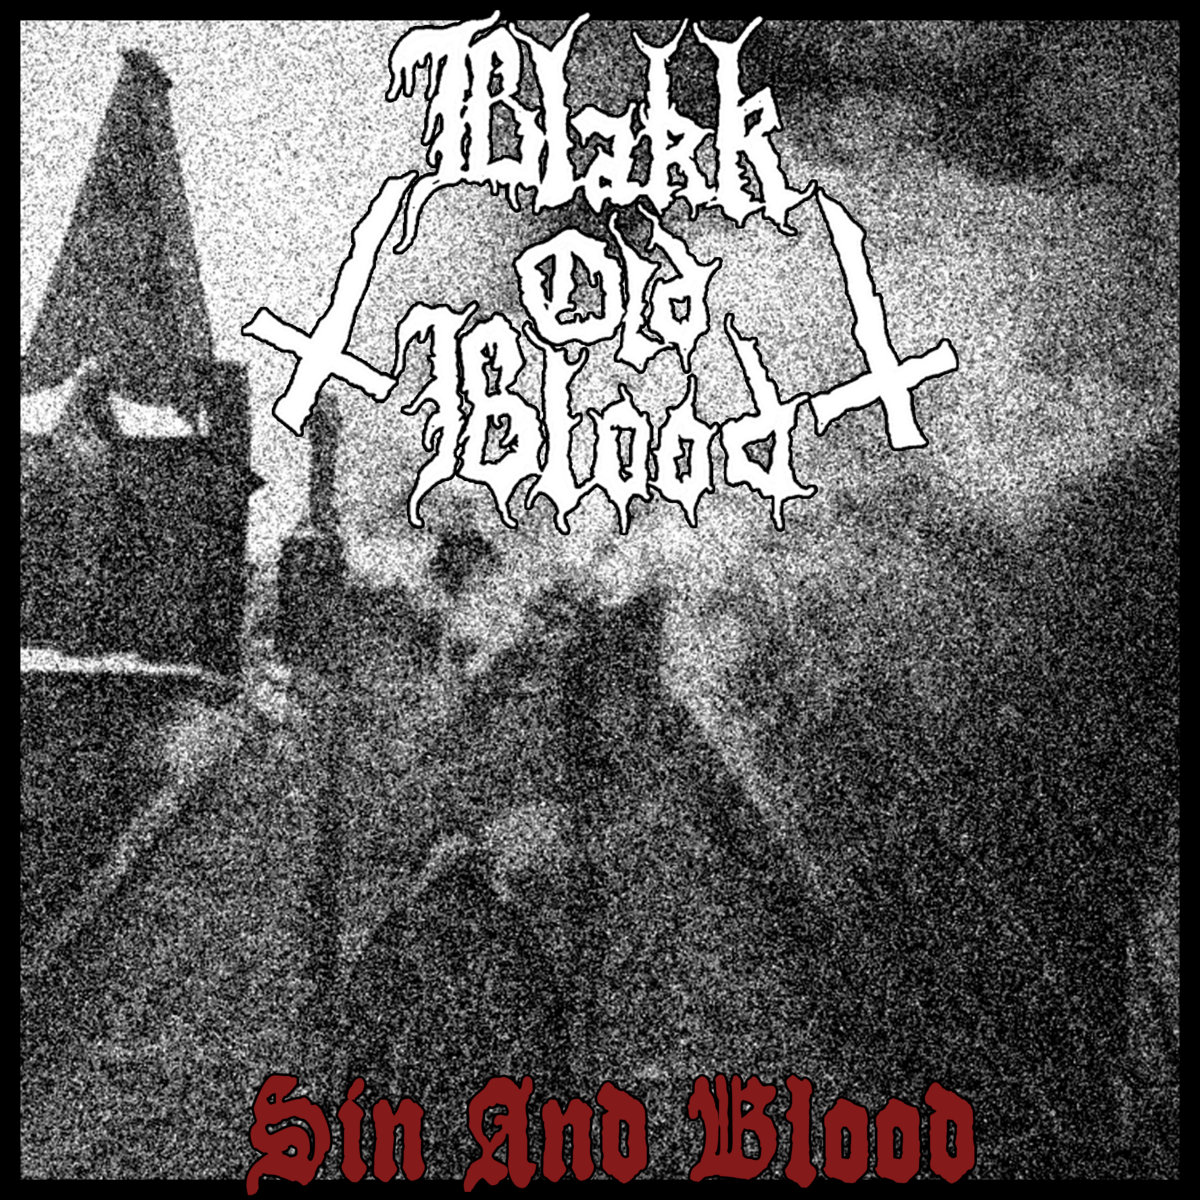 Black demo. Old Blood. Holy Sinner Blood. Funeral Rites. Bloody sin: Abominations of the Reich 2015.